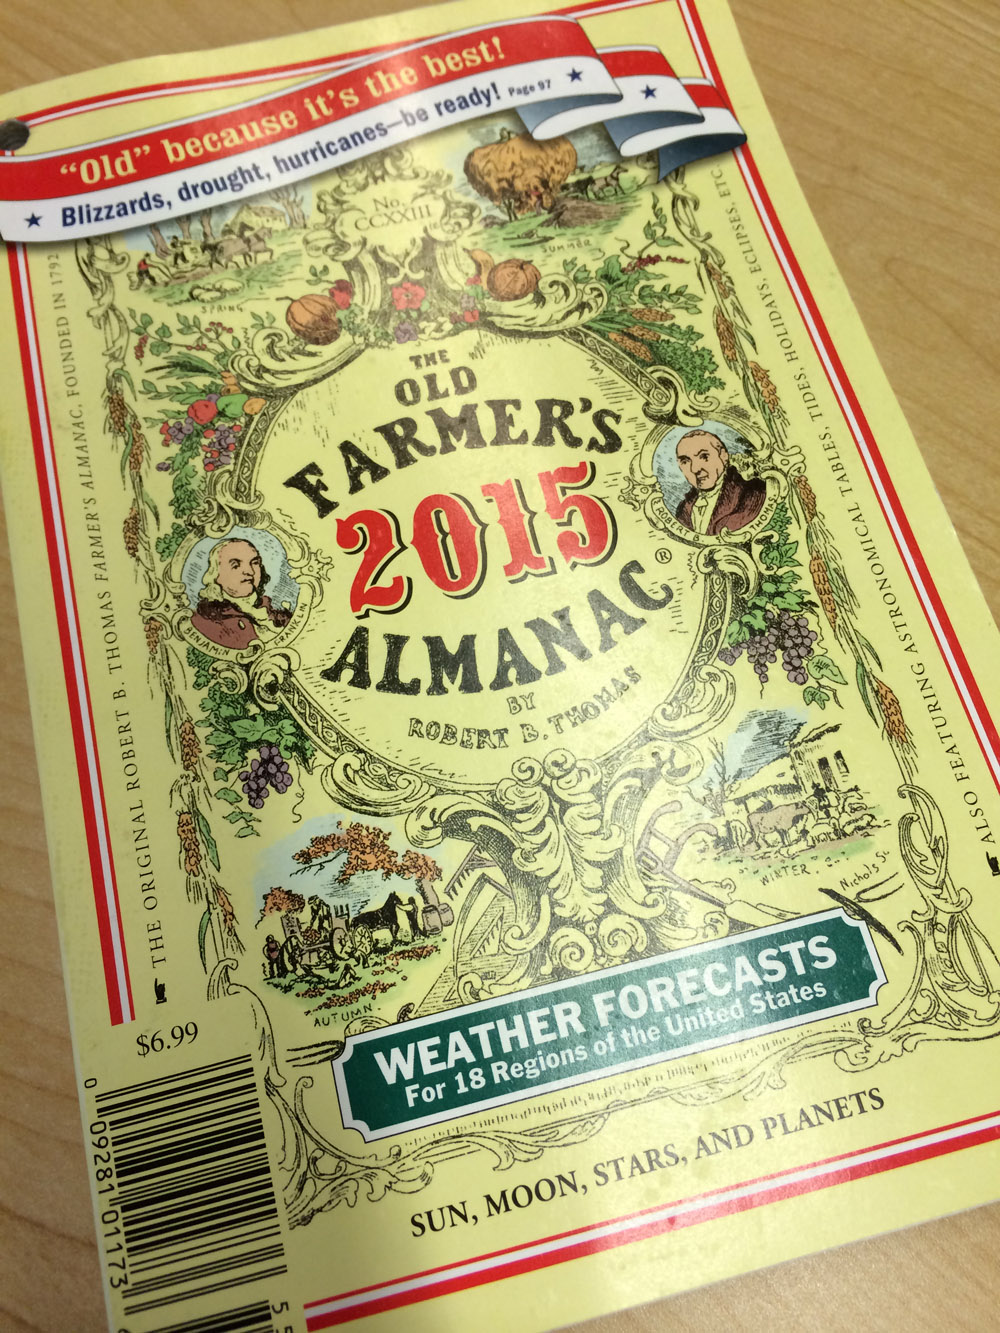 Old Farmer’s Almanac weighs in on aphrodisiacs, beauty trends